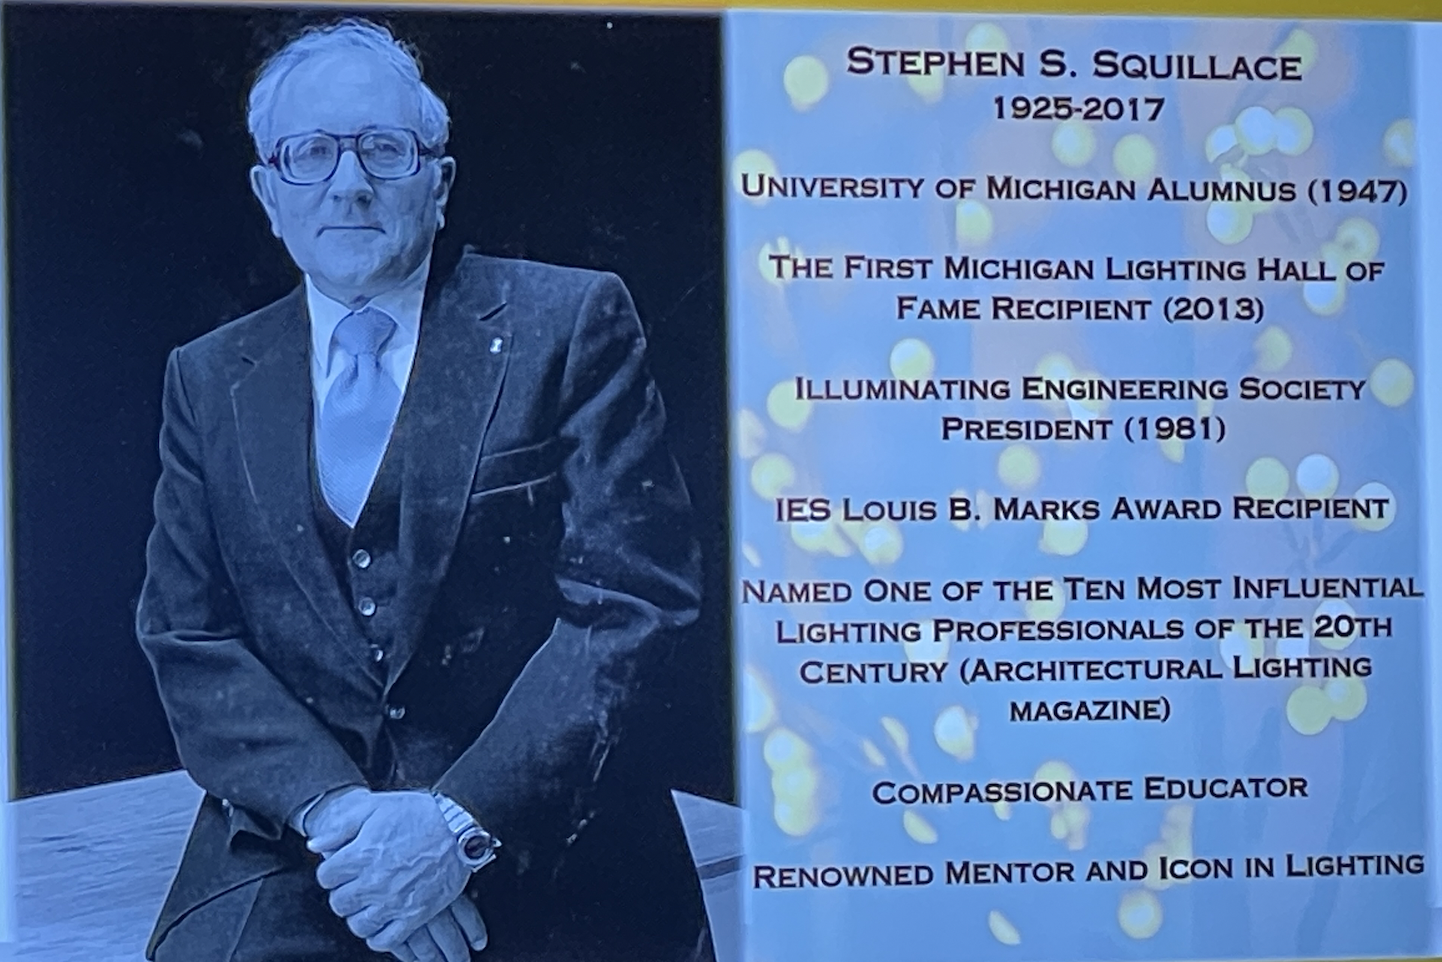 Career Highlights of Stephen S. Squillace